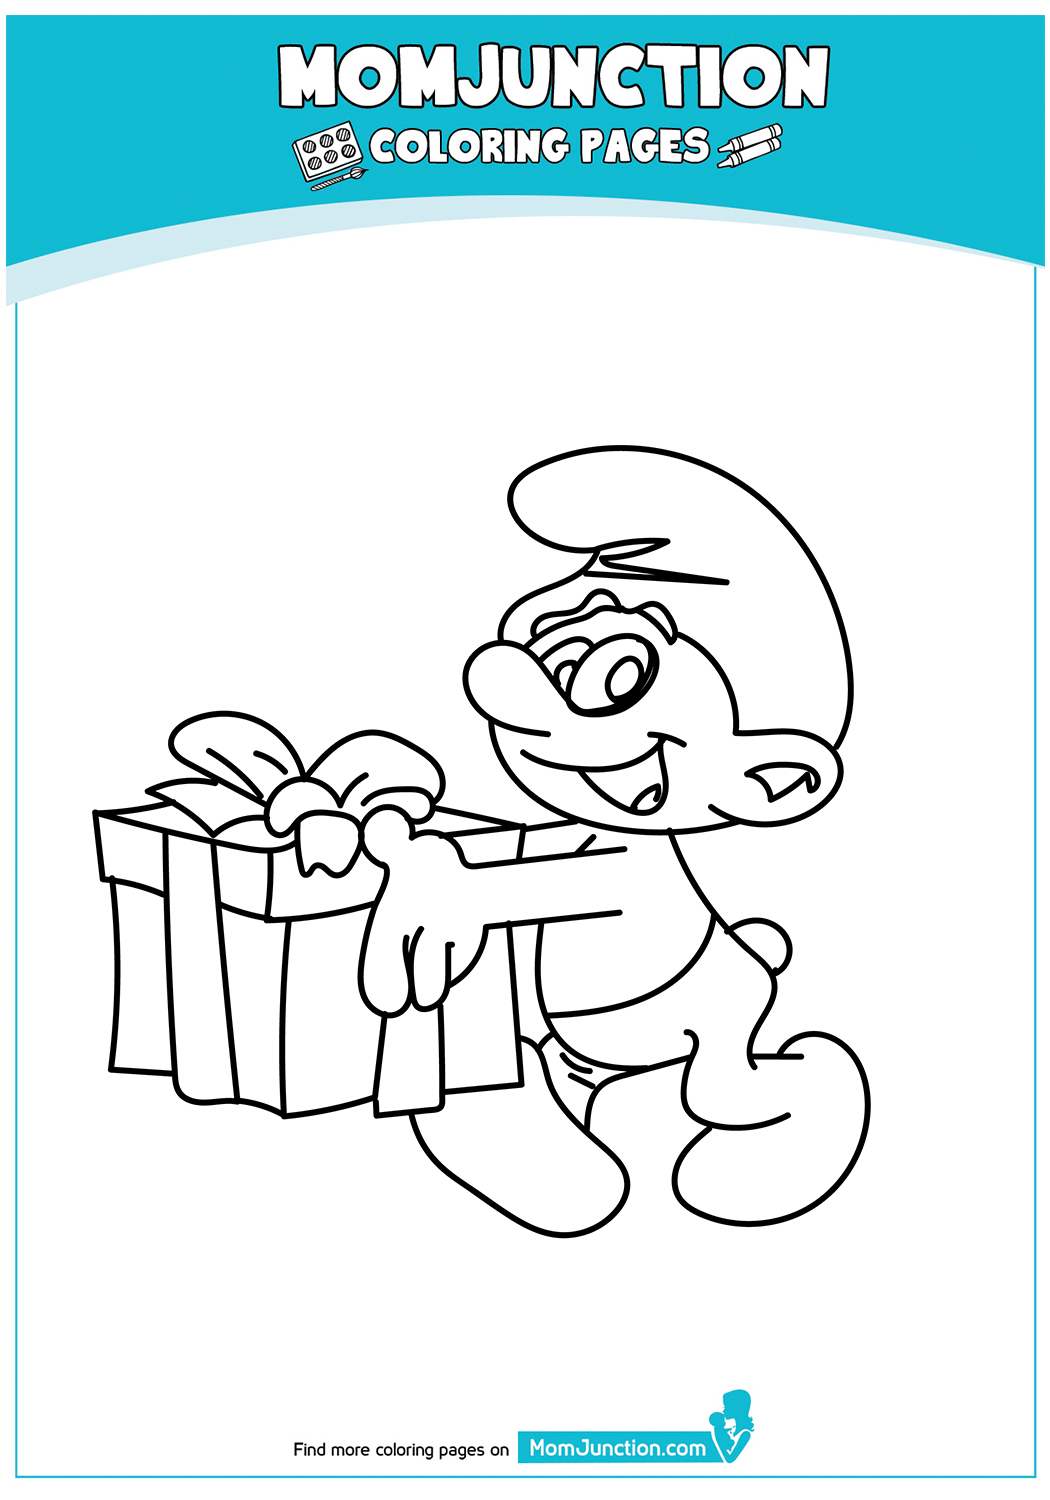 The-Smurf-Bringing-in-The-Birthday-Gift-17